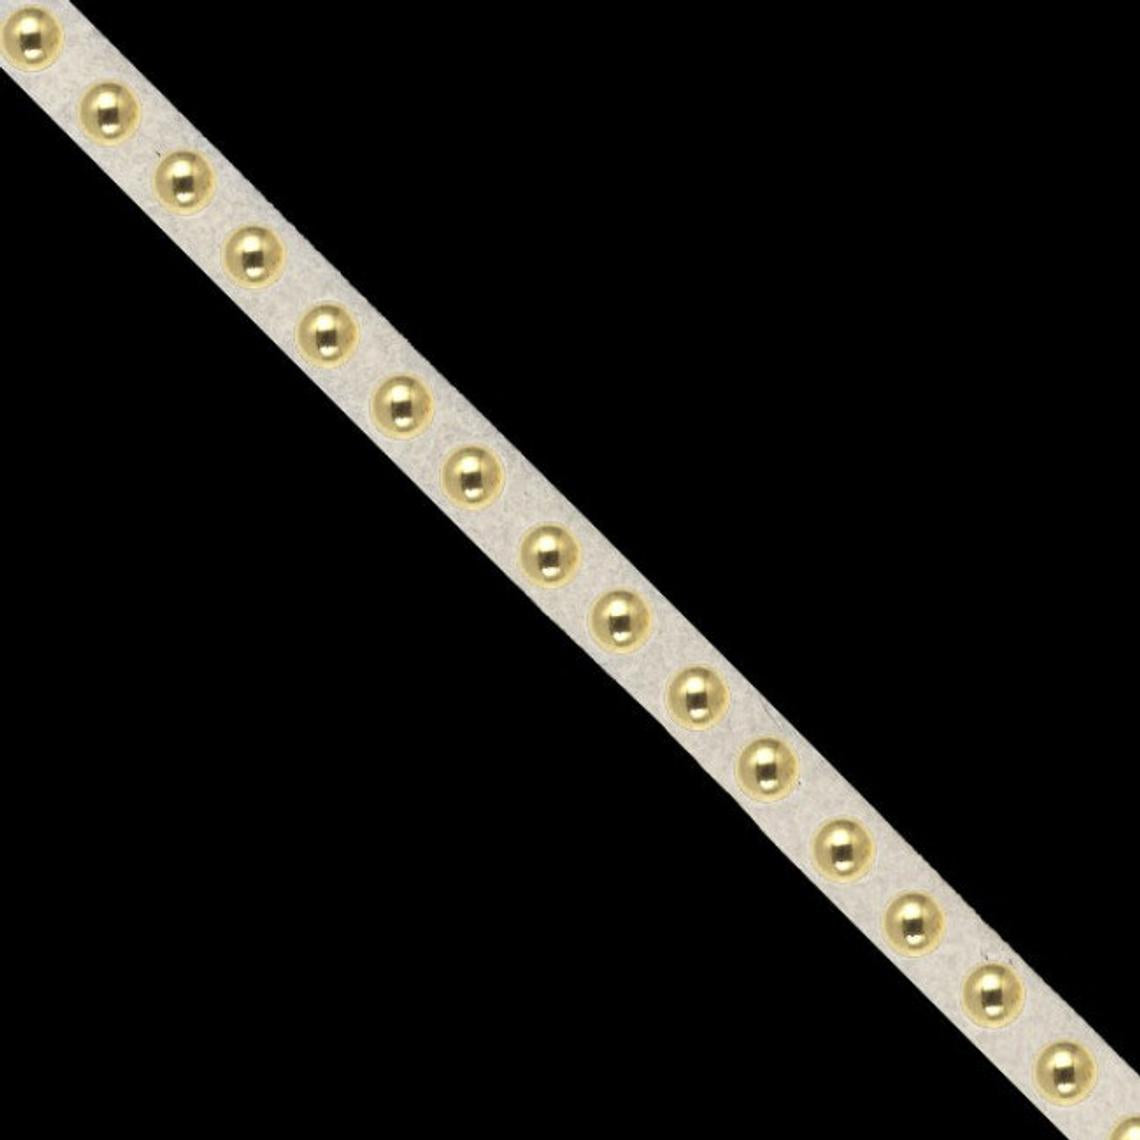 6mm Studded Suede Trim White/Gold